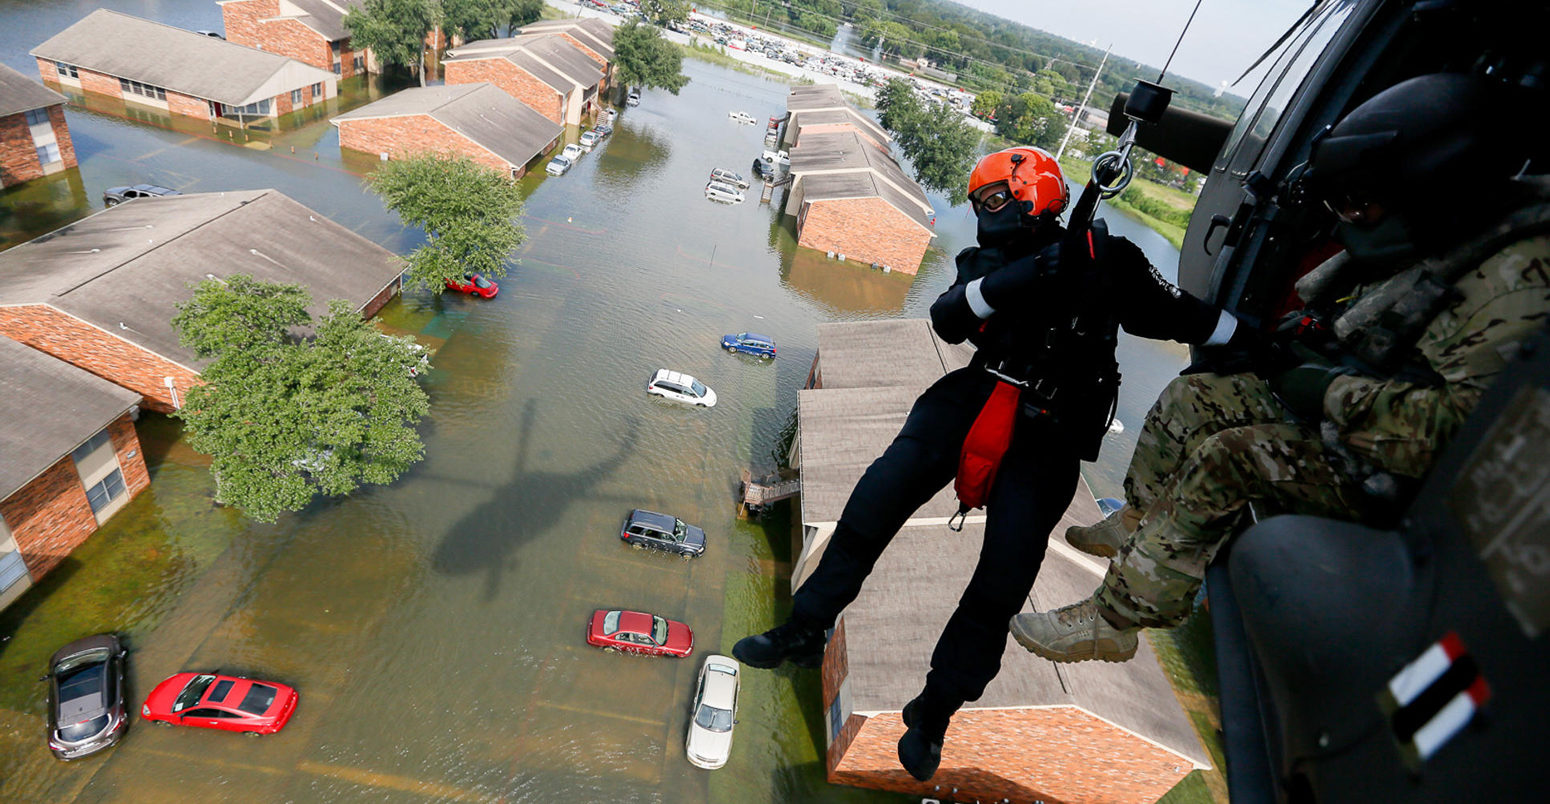 Members of the South Carolina's Helicopter Aquatic Rescue Team in Texas during Hurricane Harvey